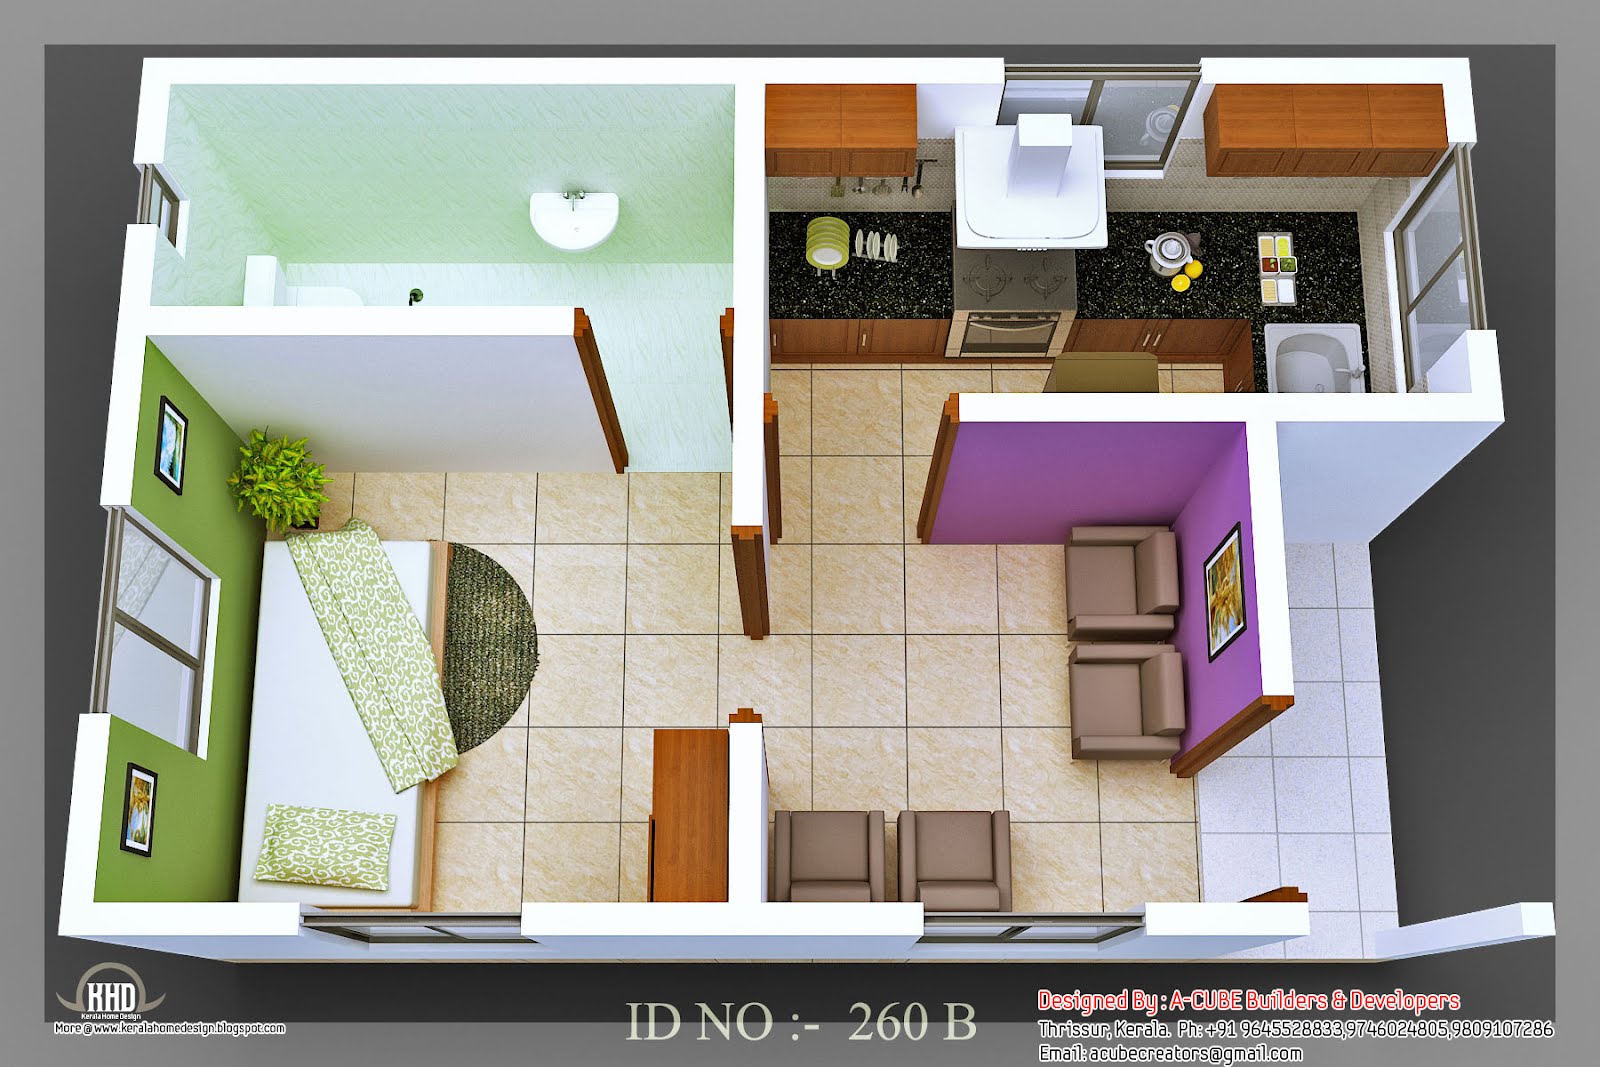 Download this Isometric Views Small House Plans picture